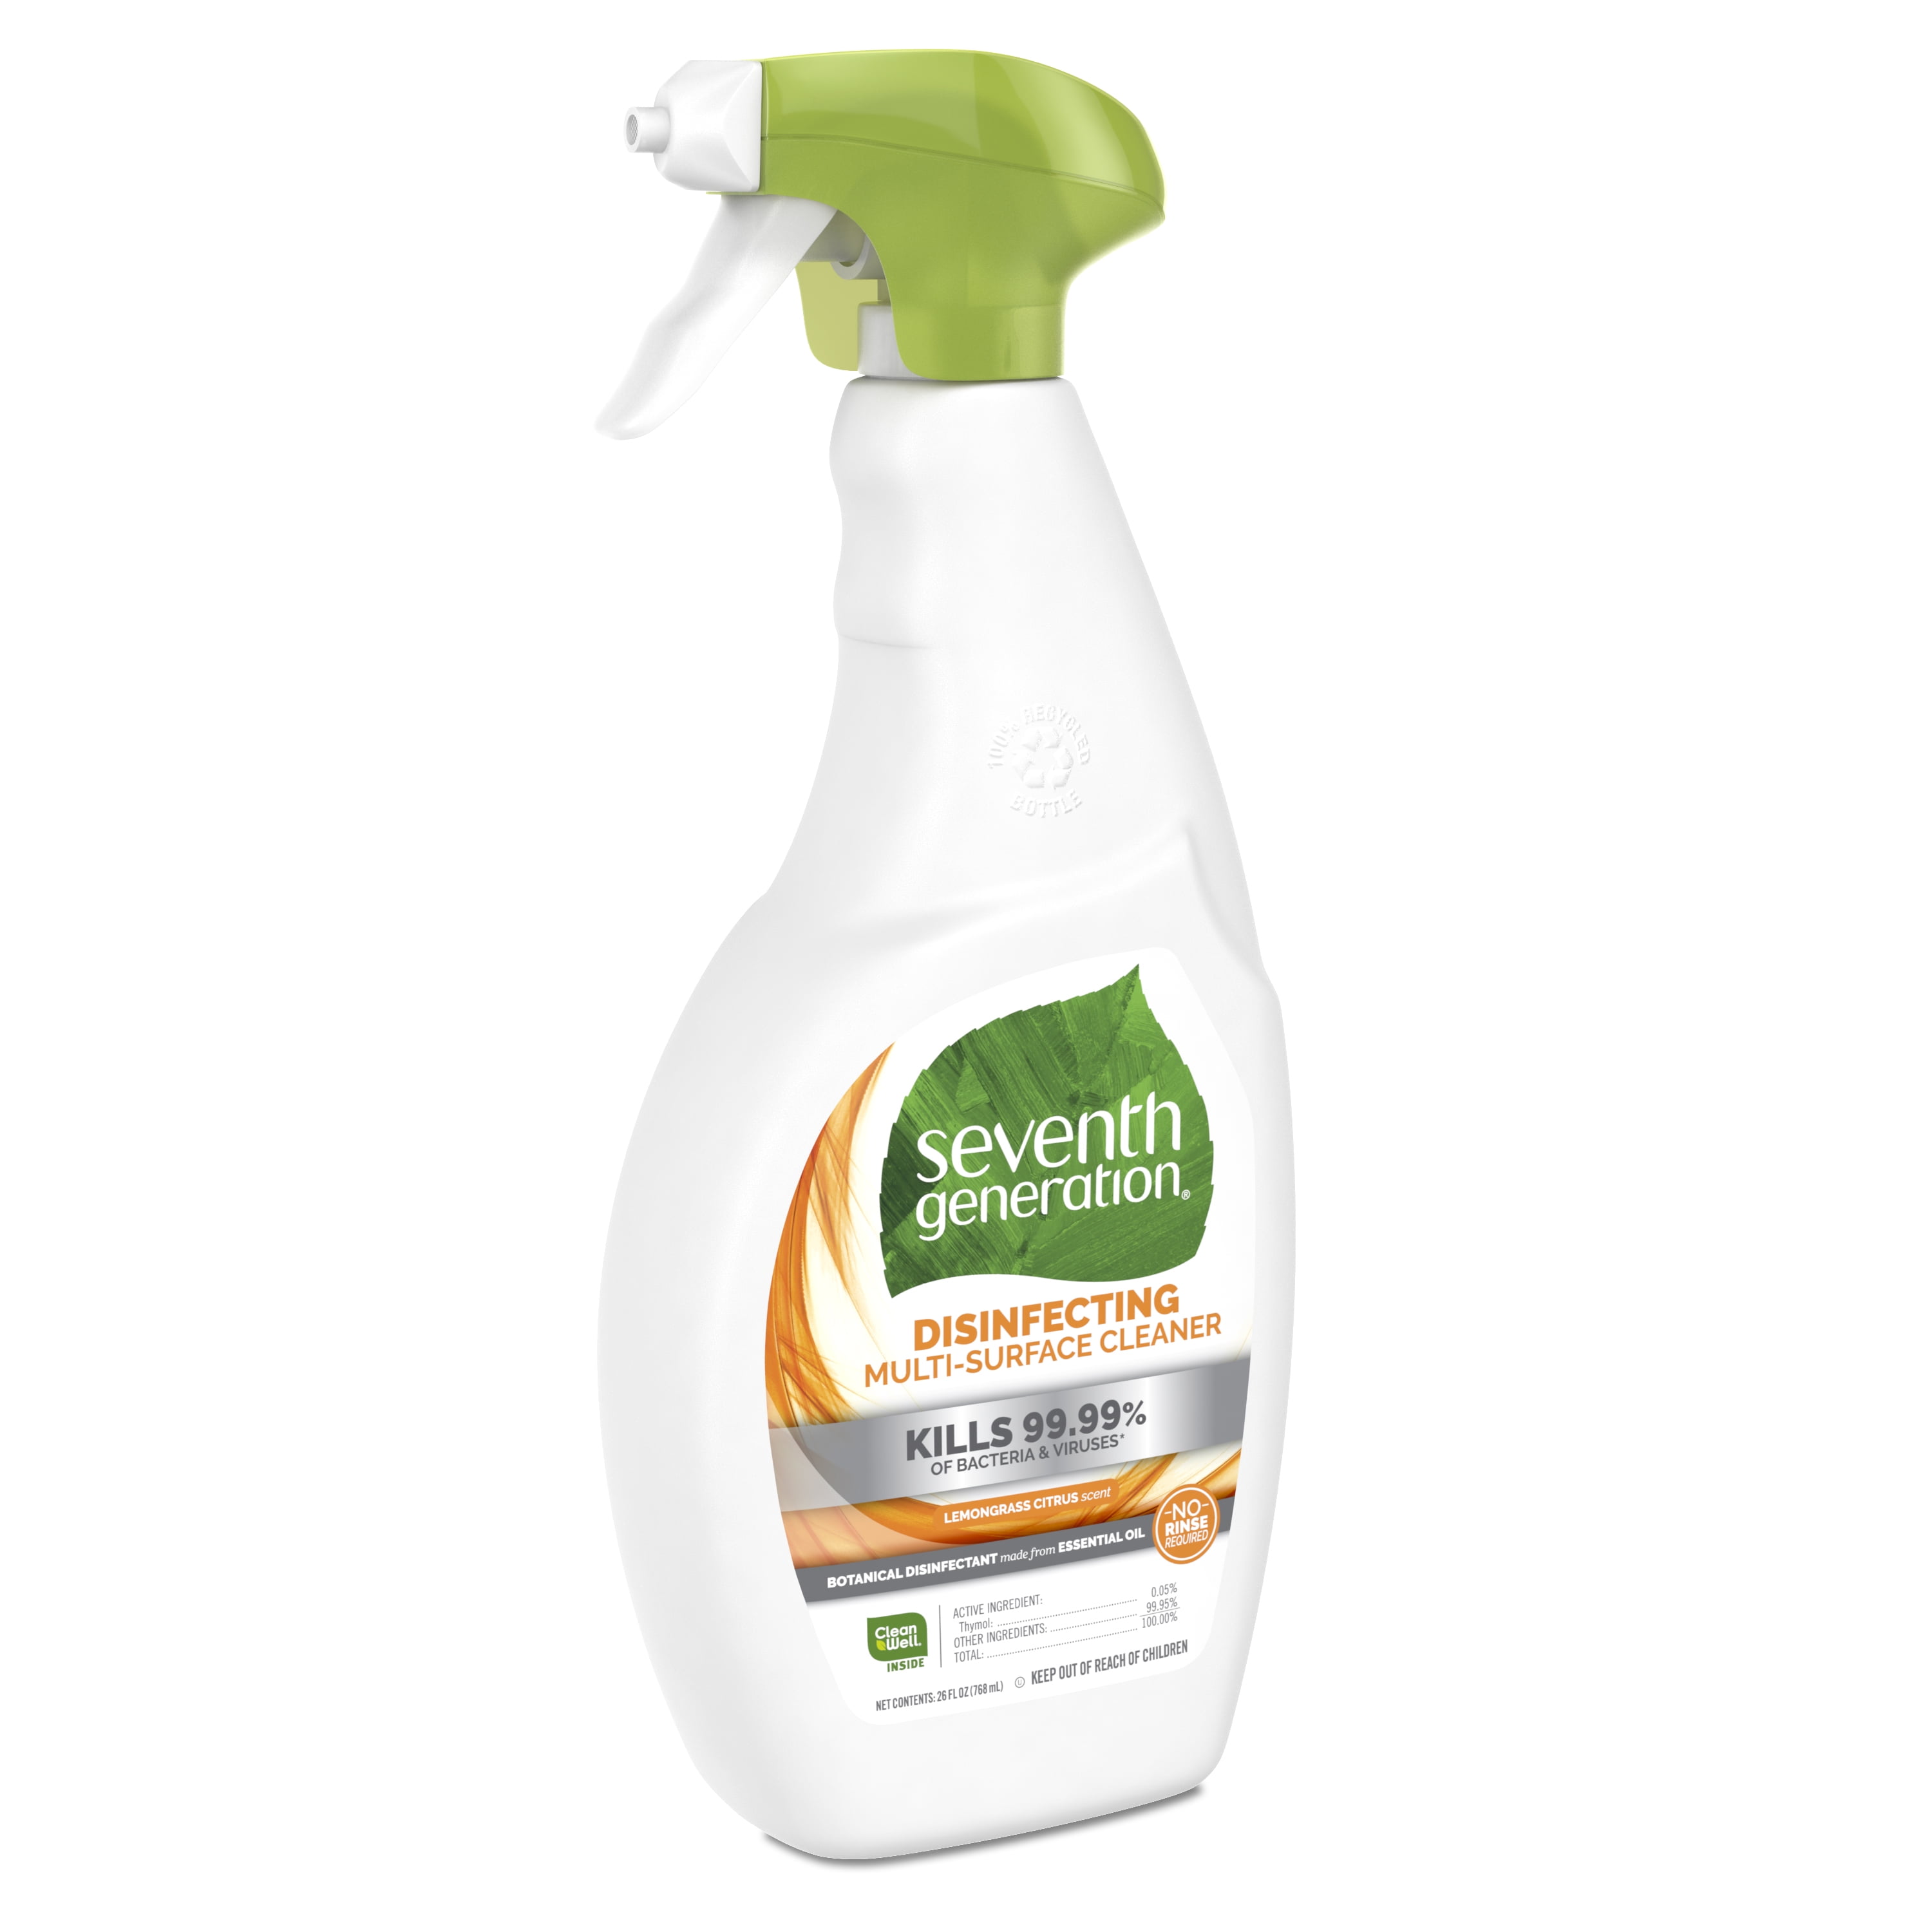 Disinfecting Multi-Surface Cleaner